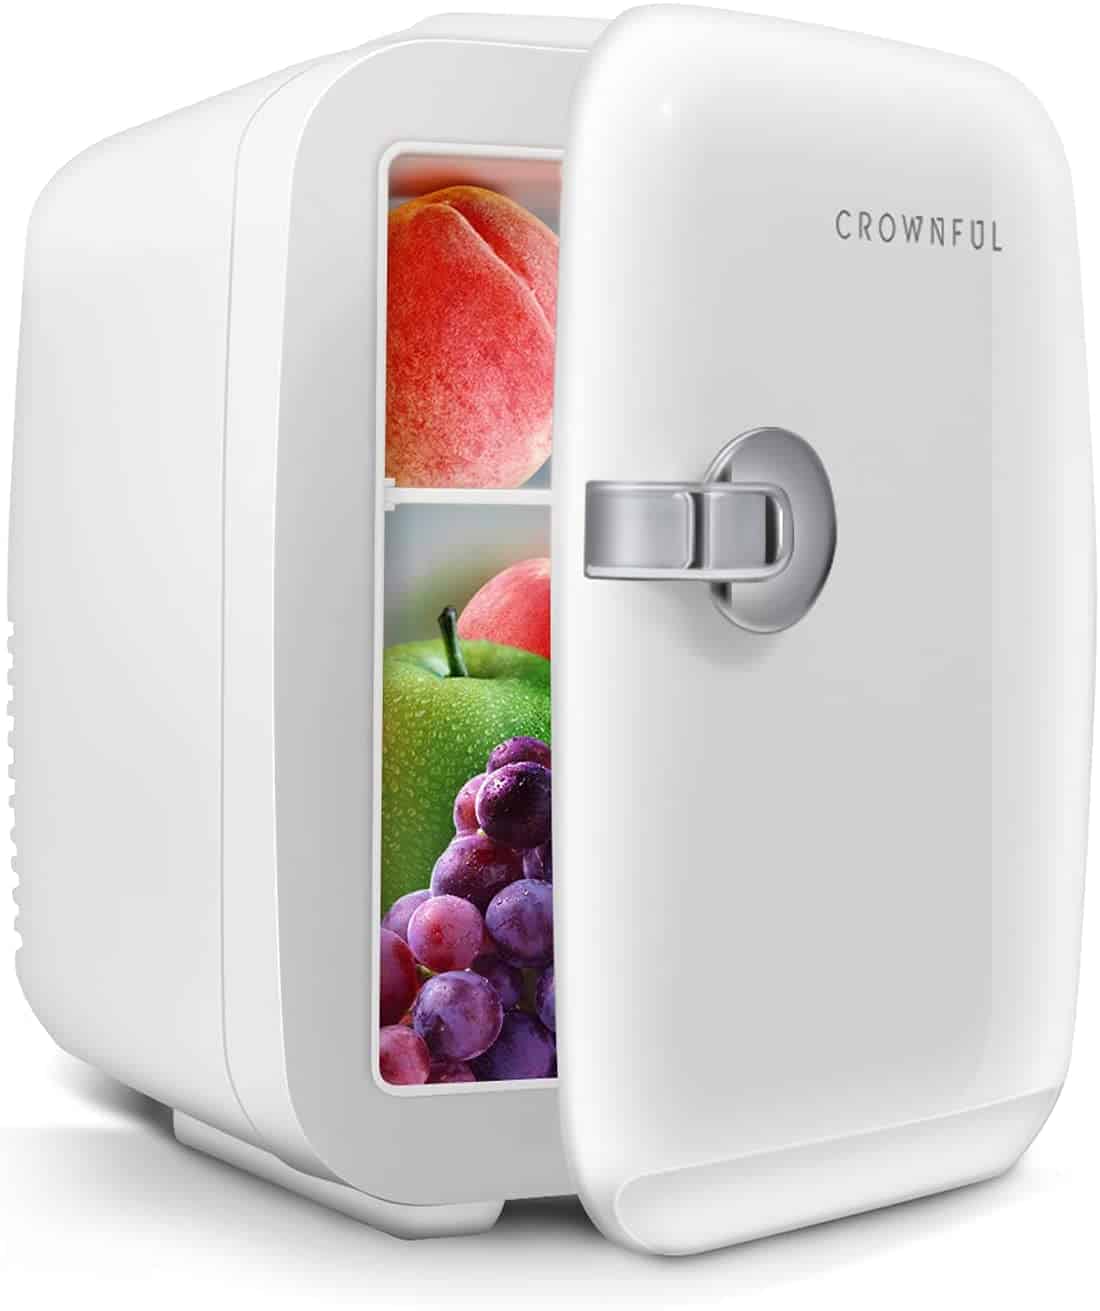 Crownful Mini Fridge, Gift Ideas for Coworkers